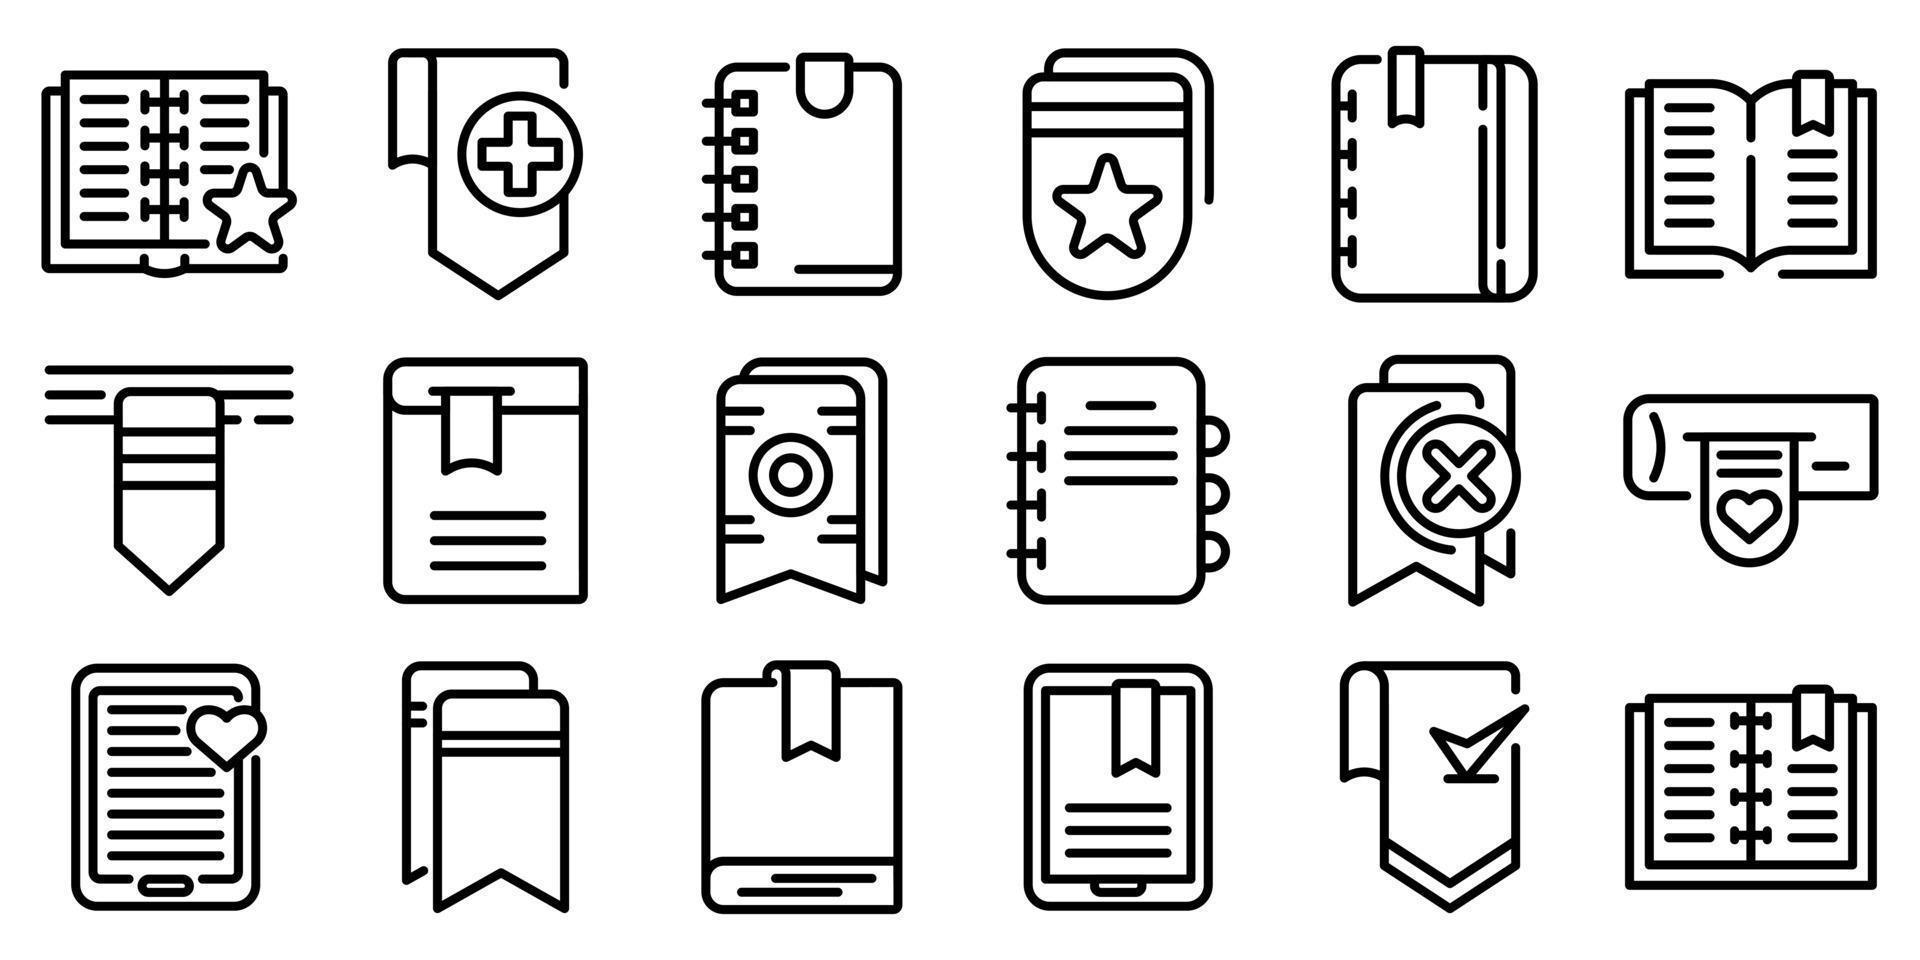 Bookmark icons set, outline style vector